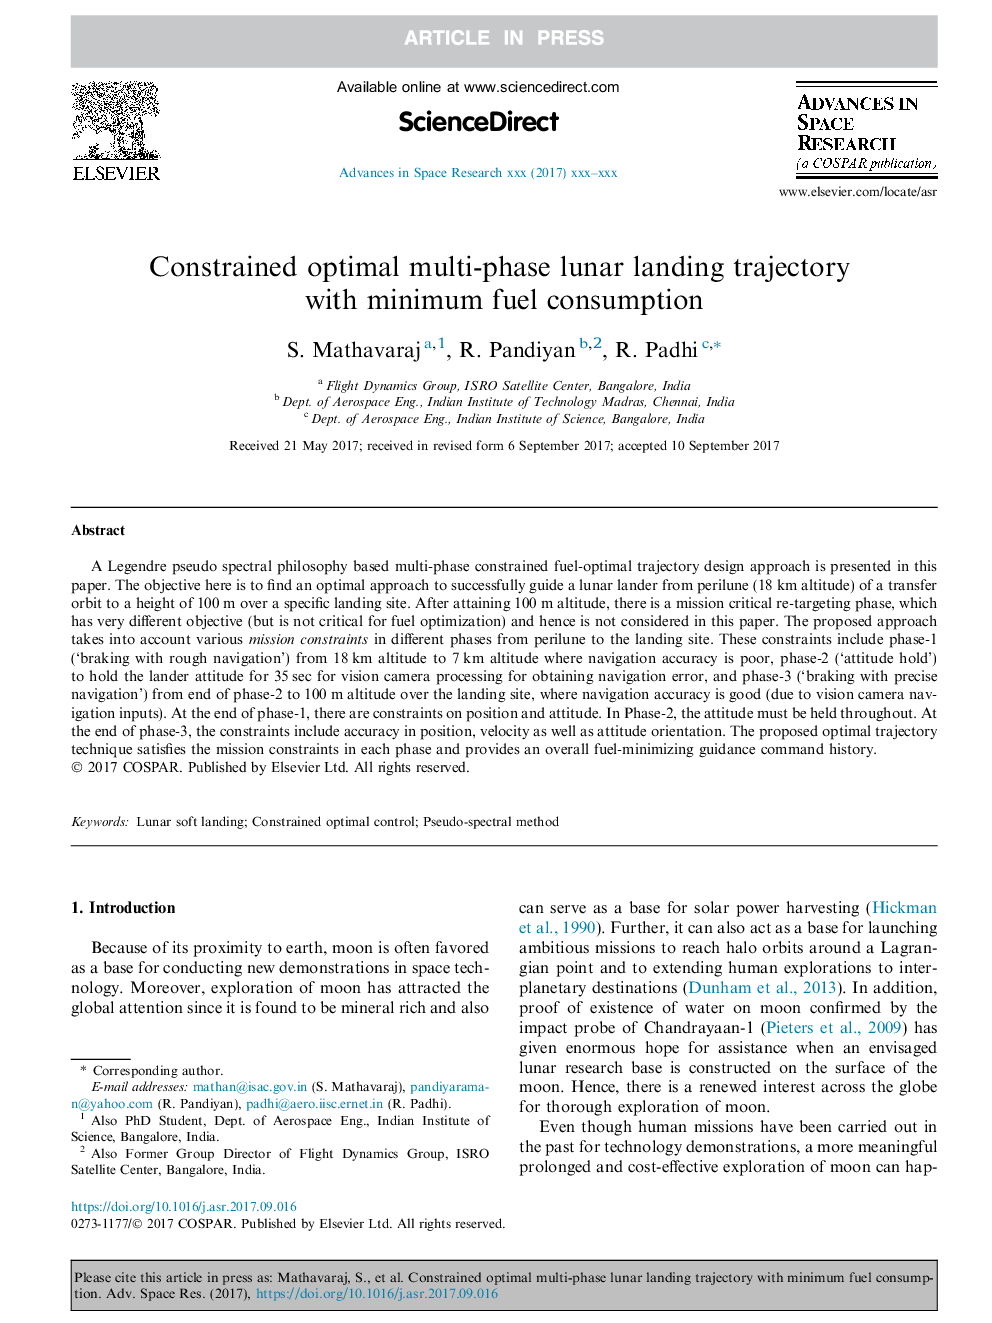 Constrained optimal multi-phase lunar landing trajectory with minimum fuel consumption